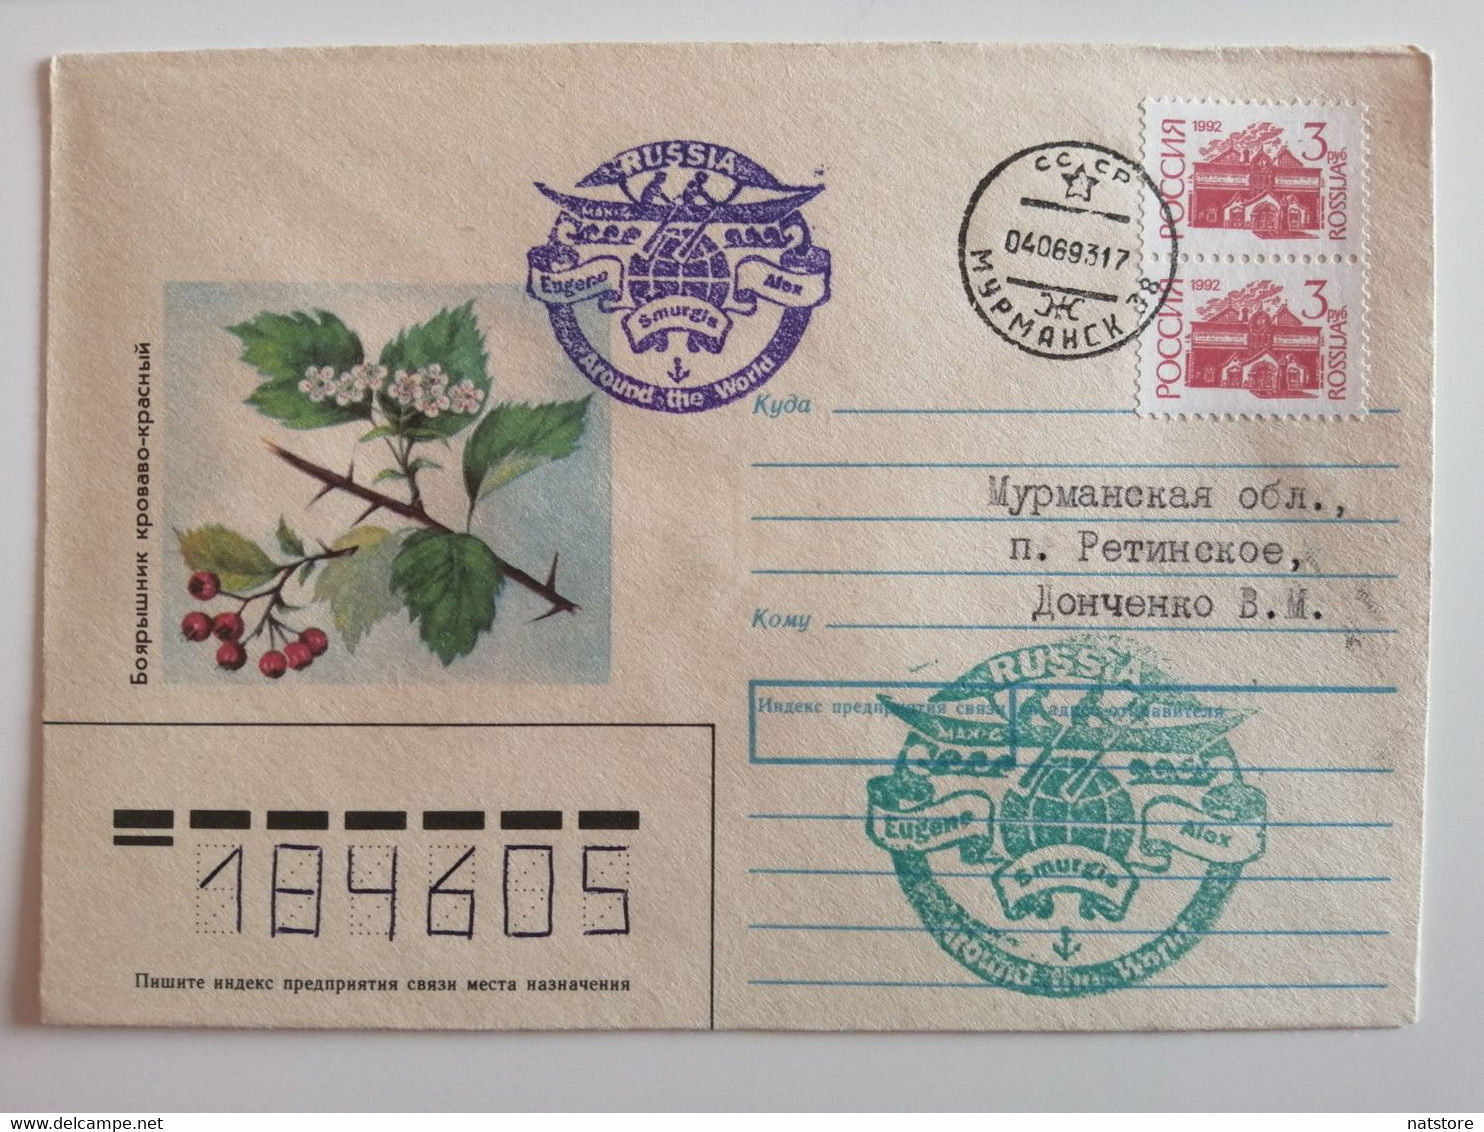 1989..USSR. COVER WITH GLUED STAMP AND SPECIAL CANCELLATION ''RUSSIA..EUGENE ALEX SMURGIS..AROUND THE WORLD'' - Forschungsprogramme